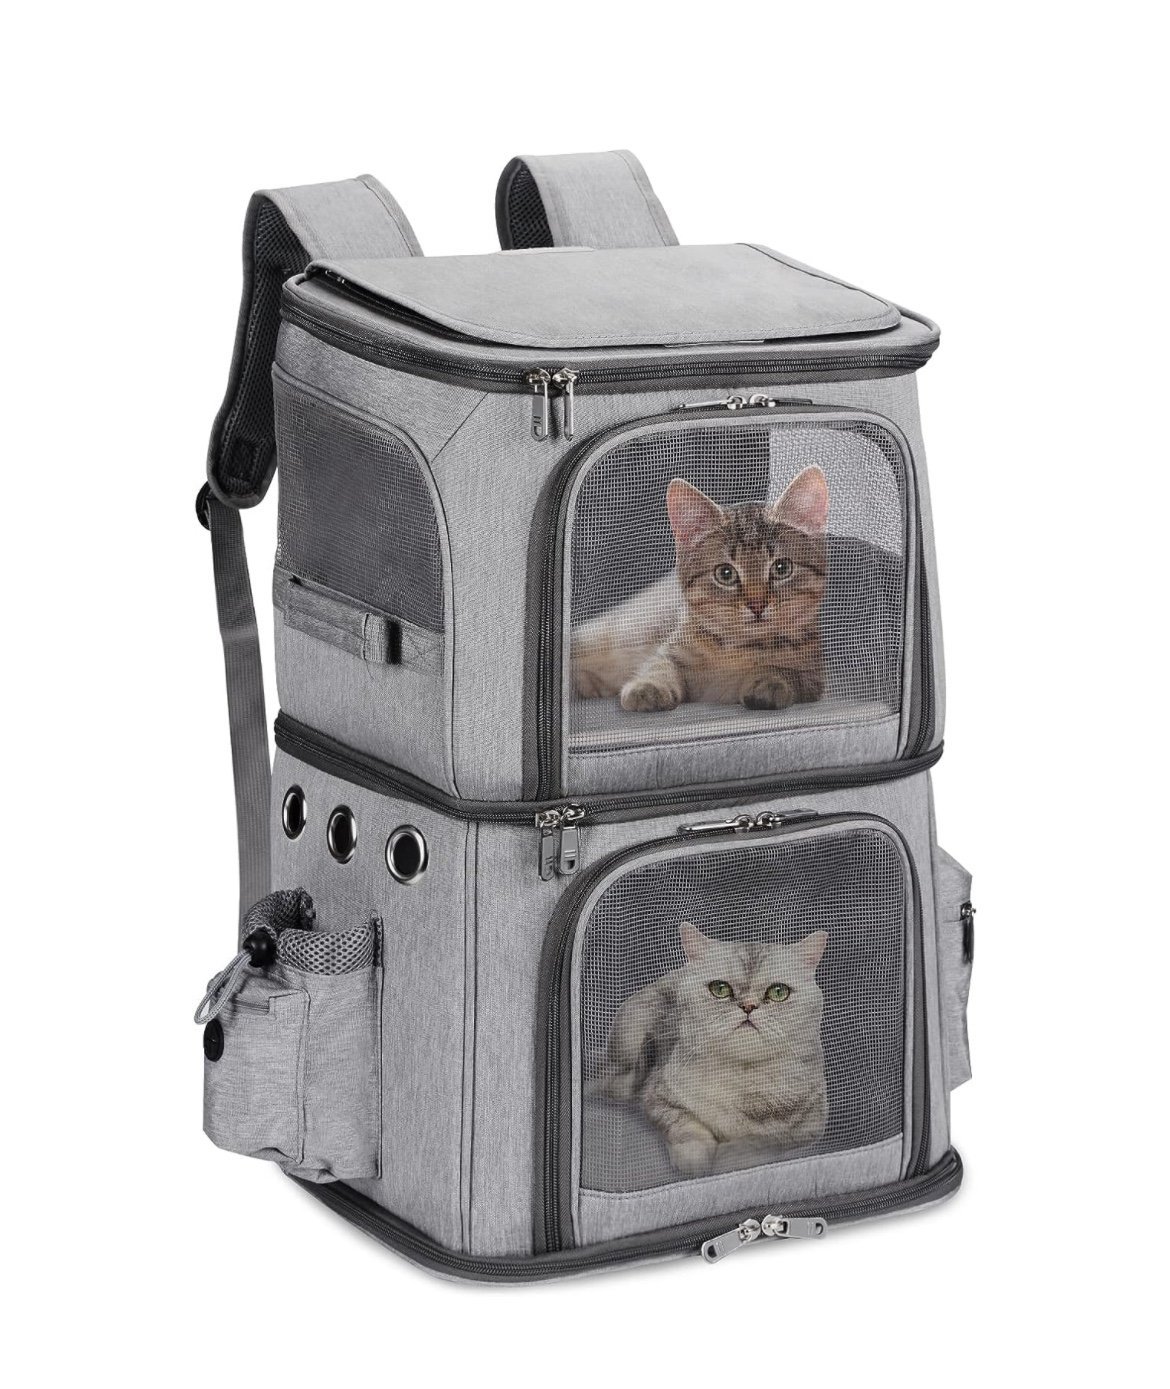 Double-Compartment Pet Carrier Backpack azikjHnTM